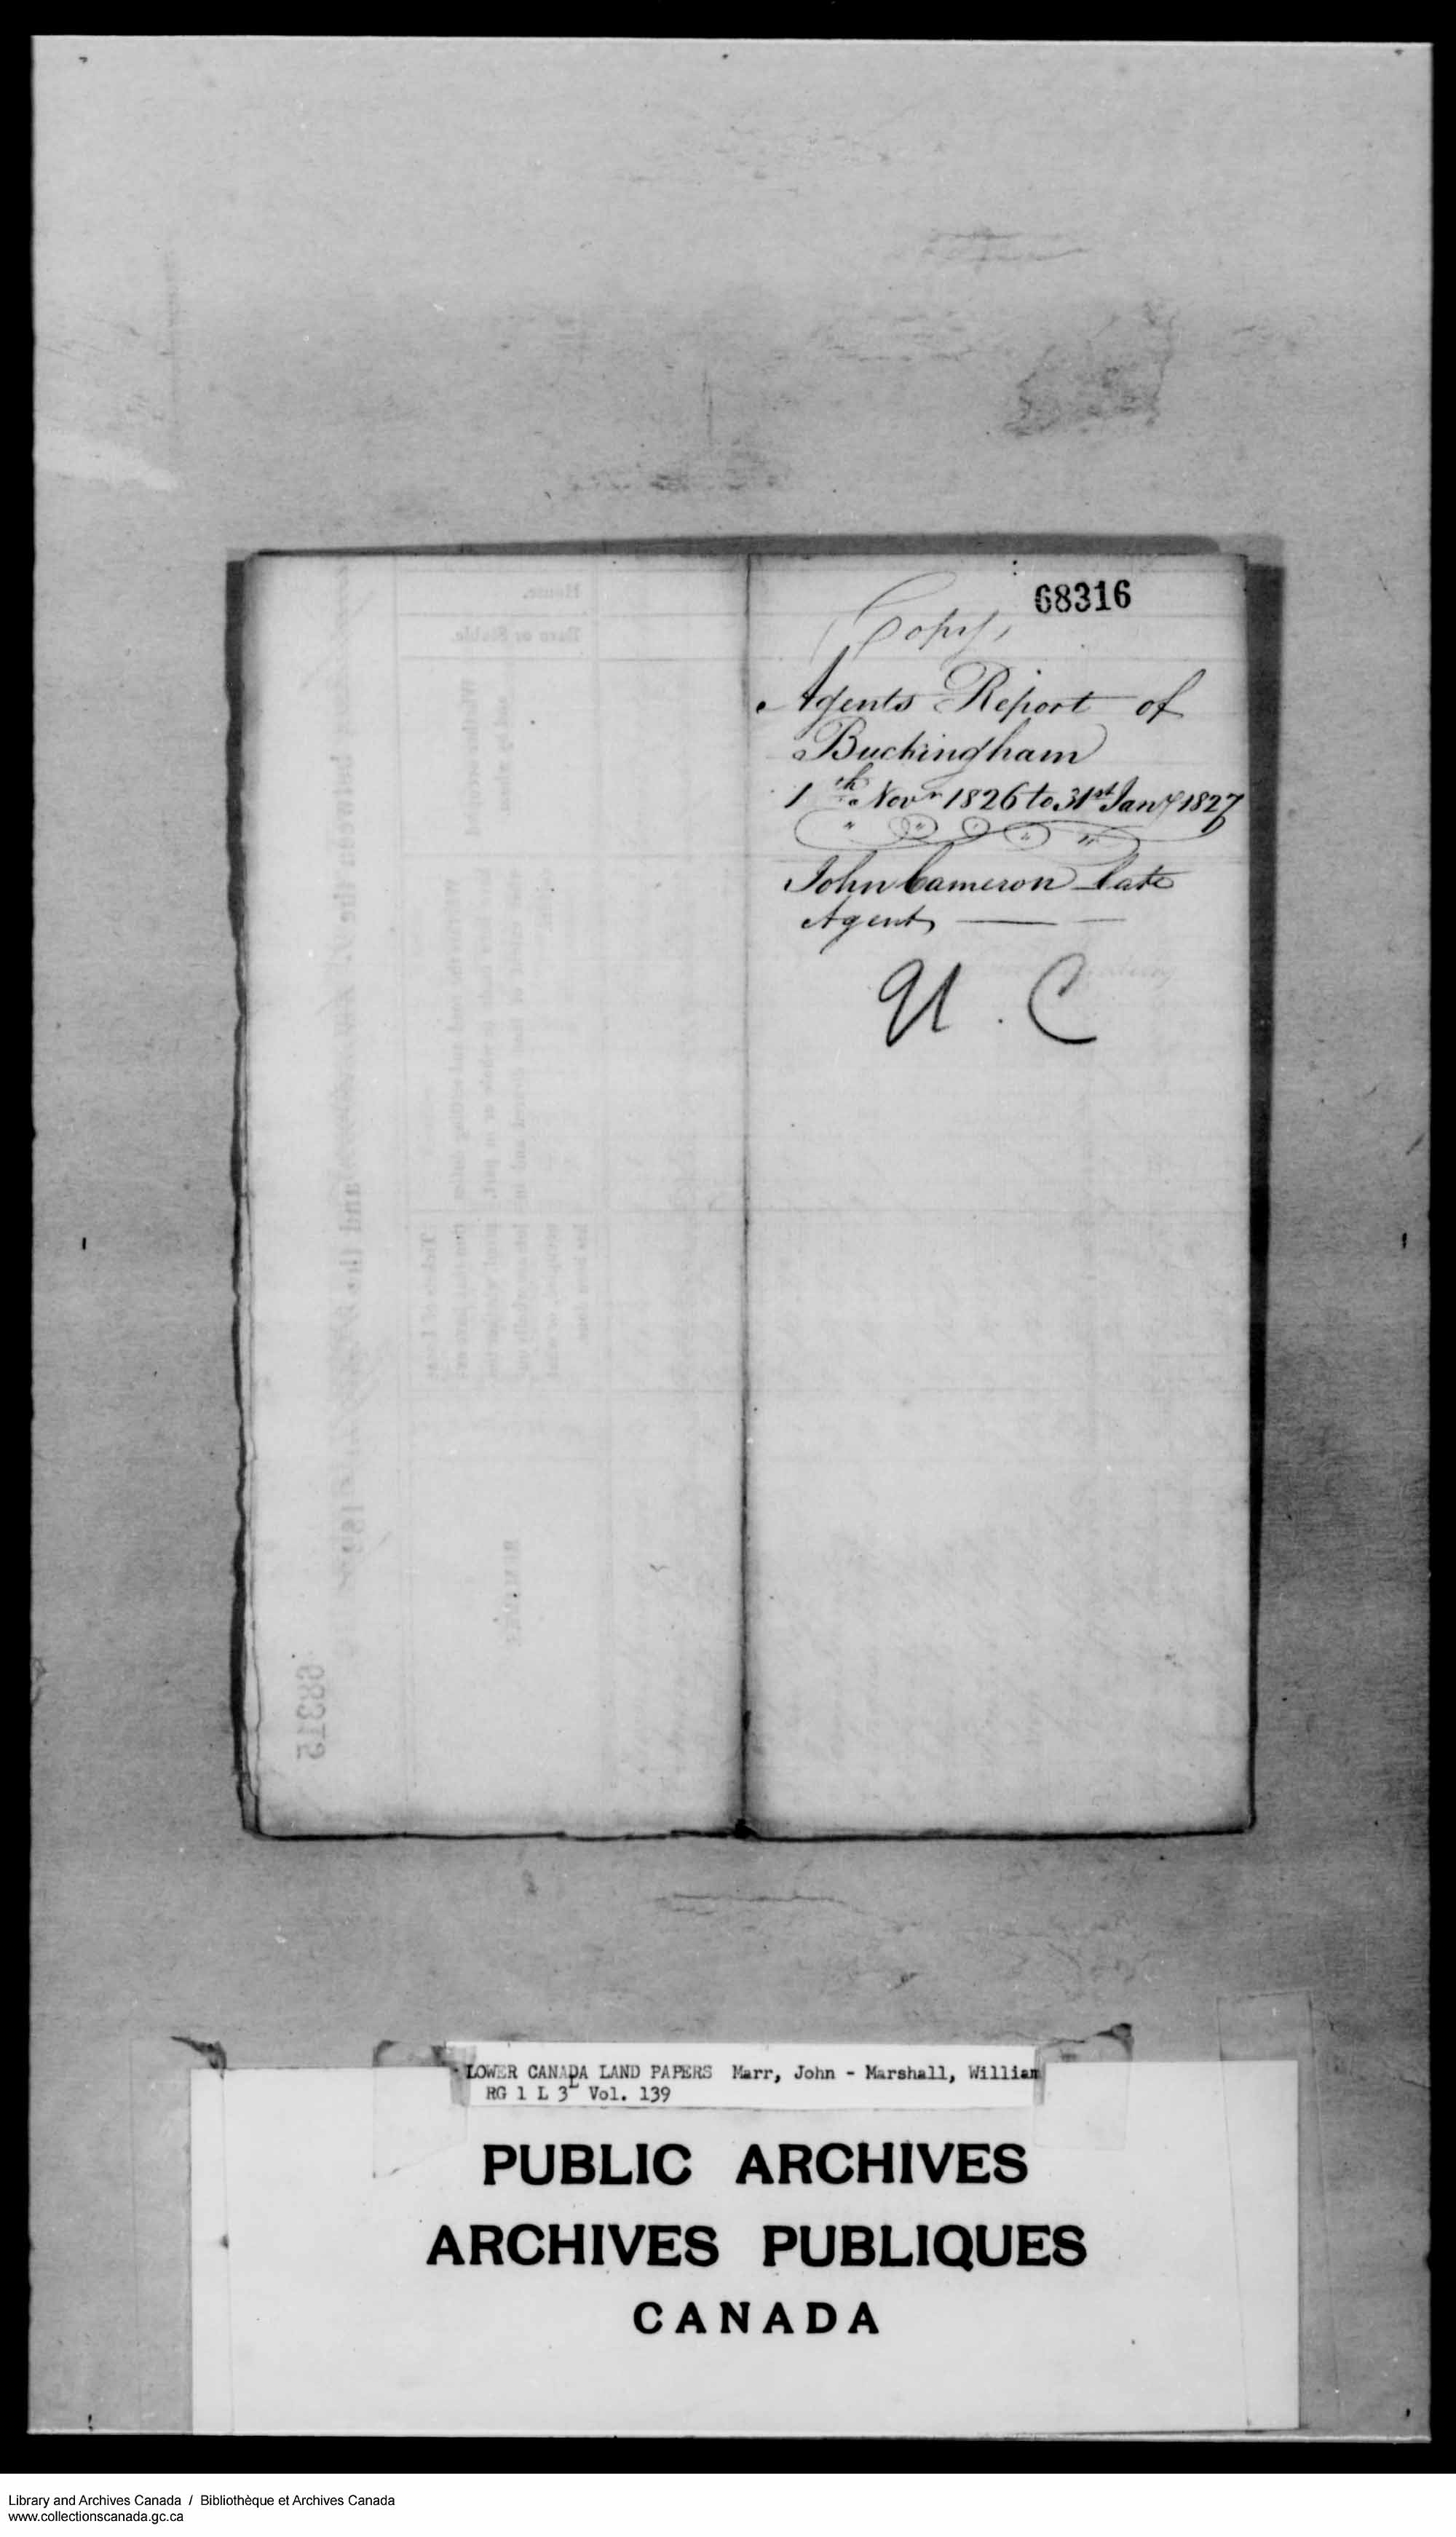 Digitized page of  for Image No.: e008713572